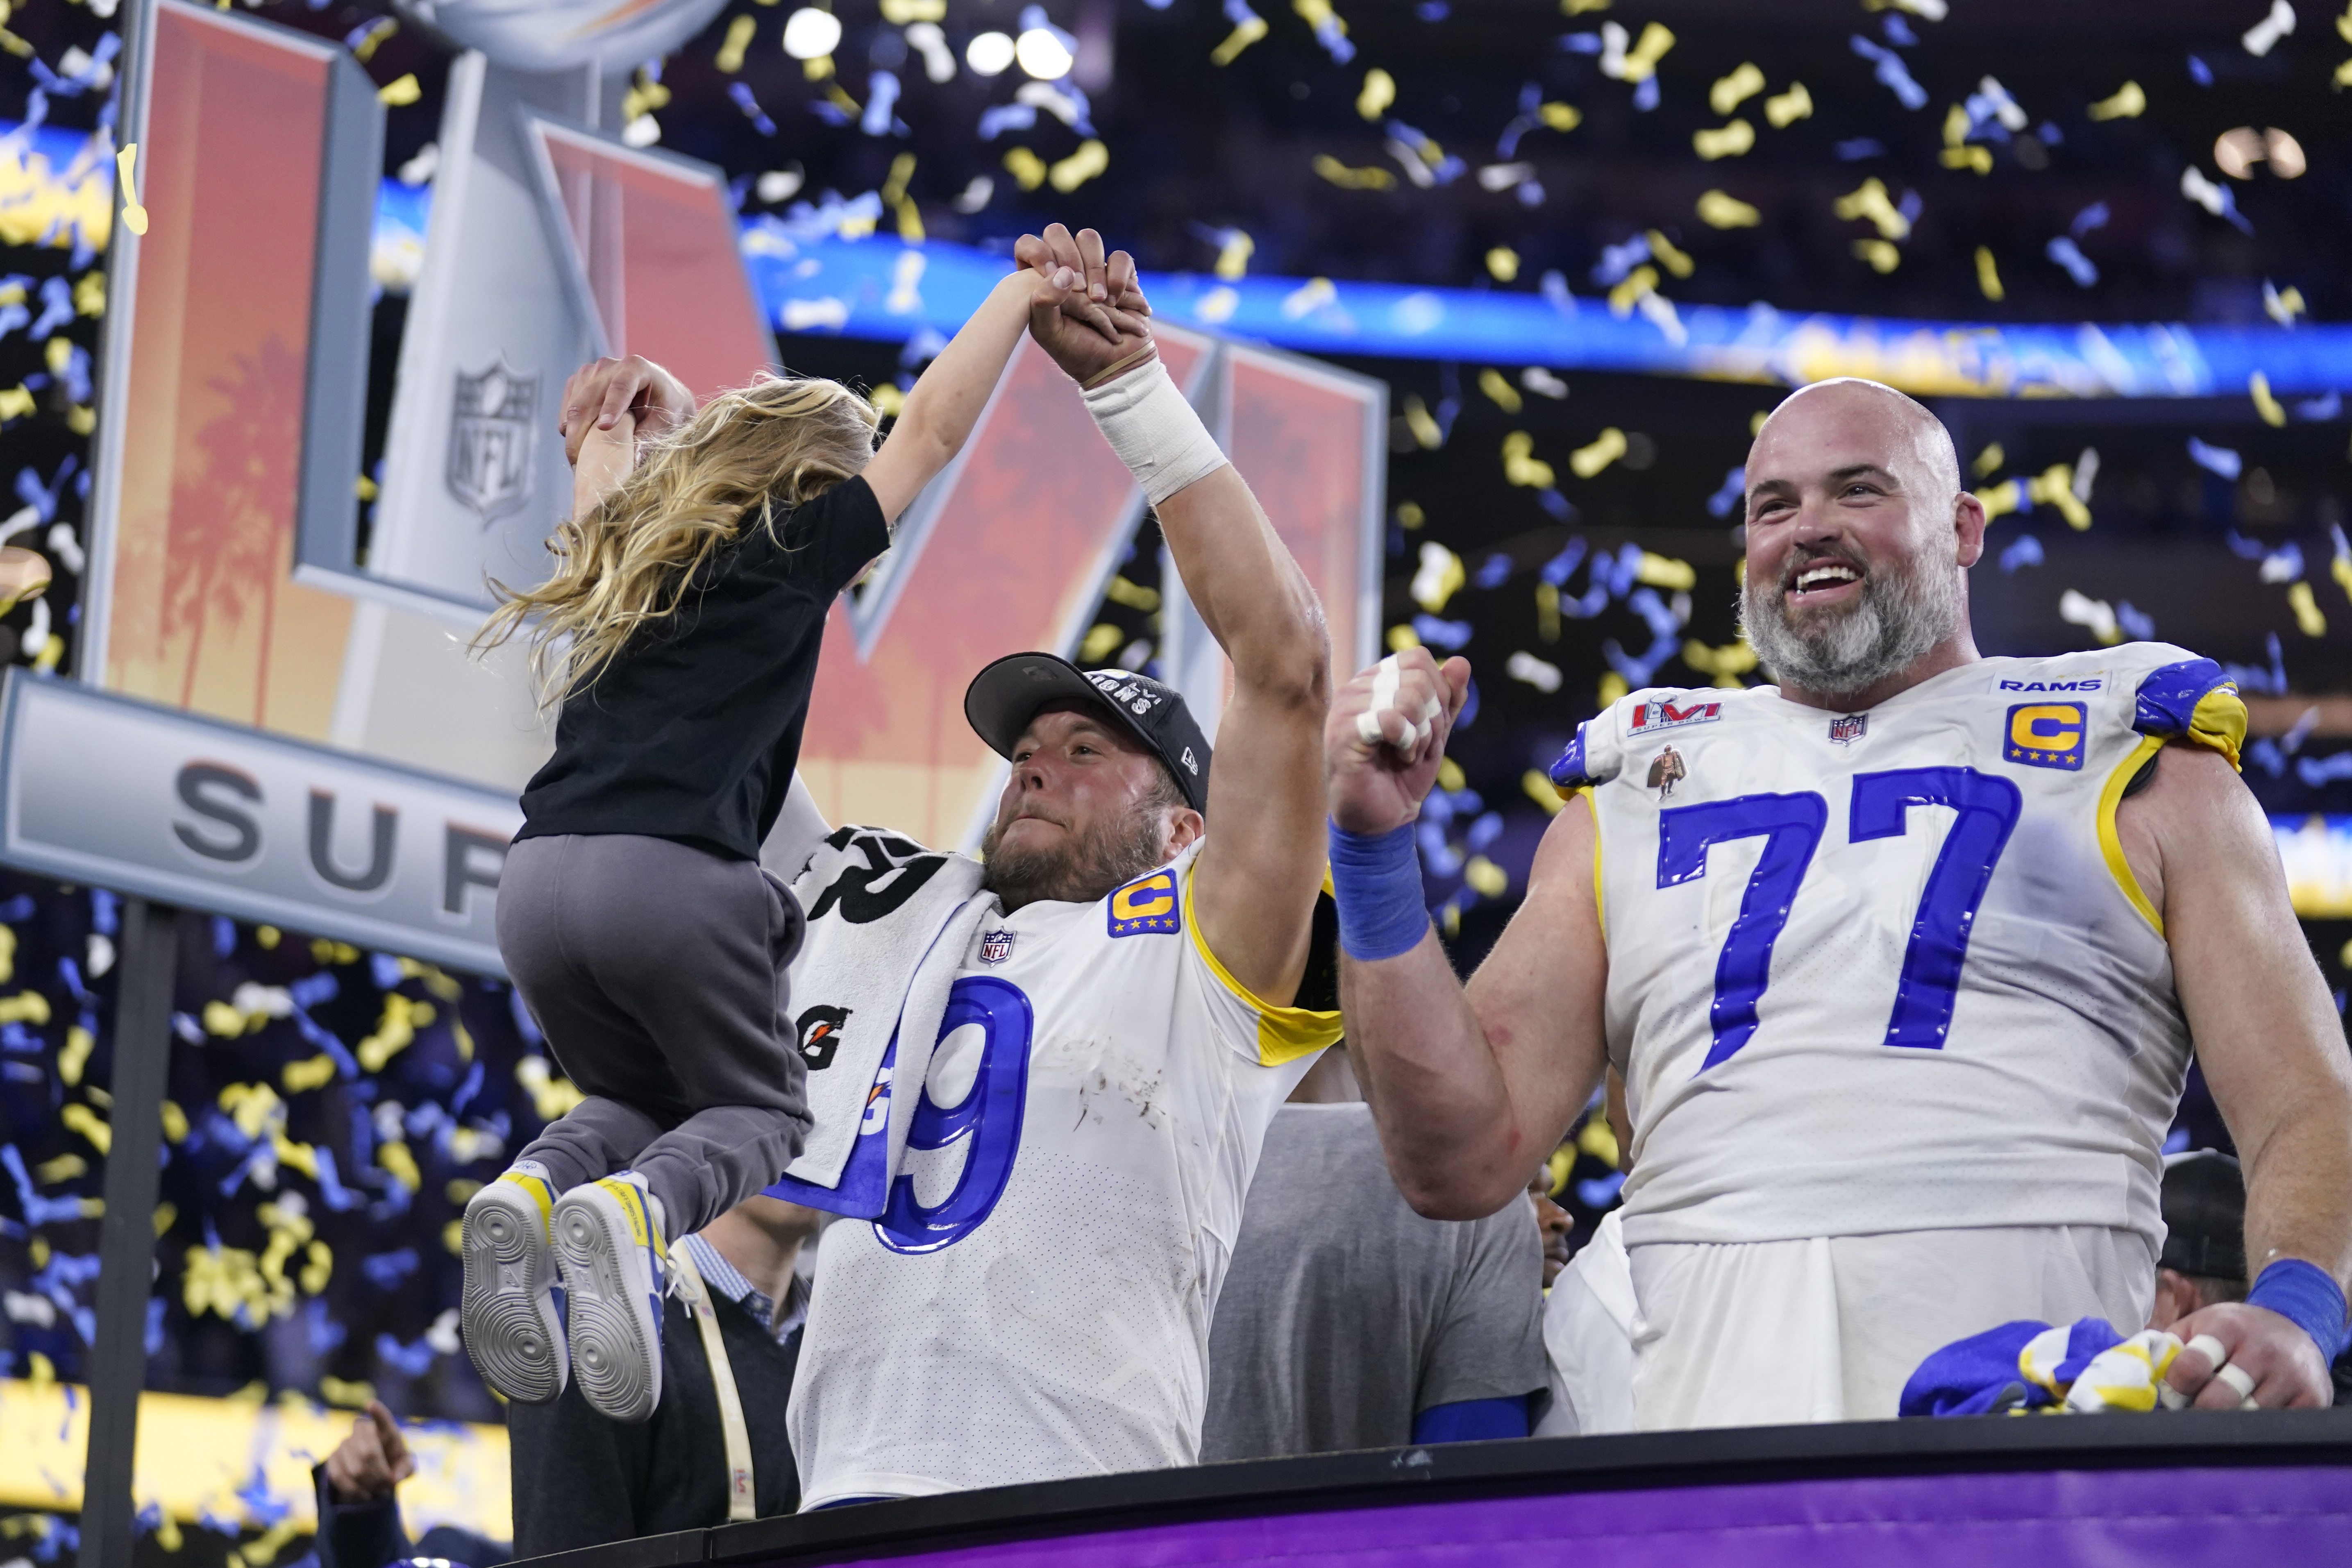 8 players with Michigan ties earn Super Bowl ring with Los Angeles Rams 